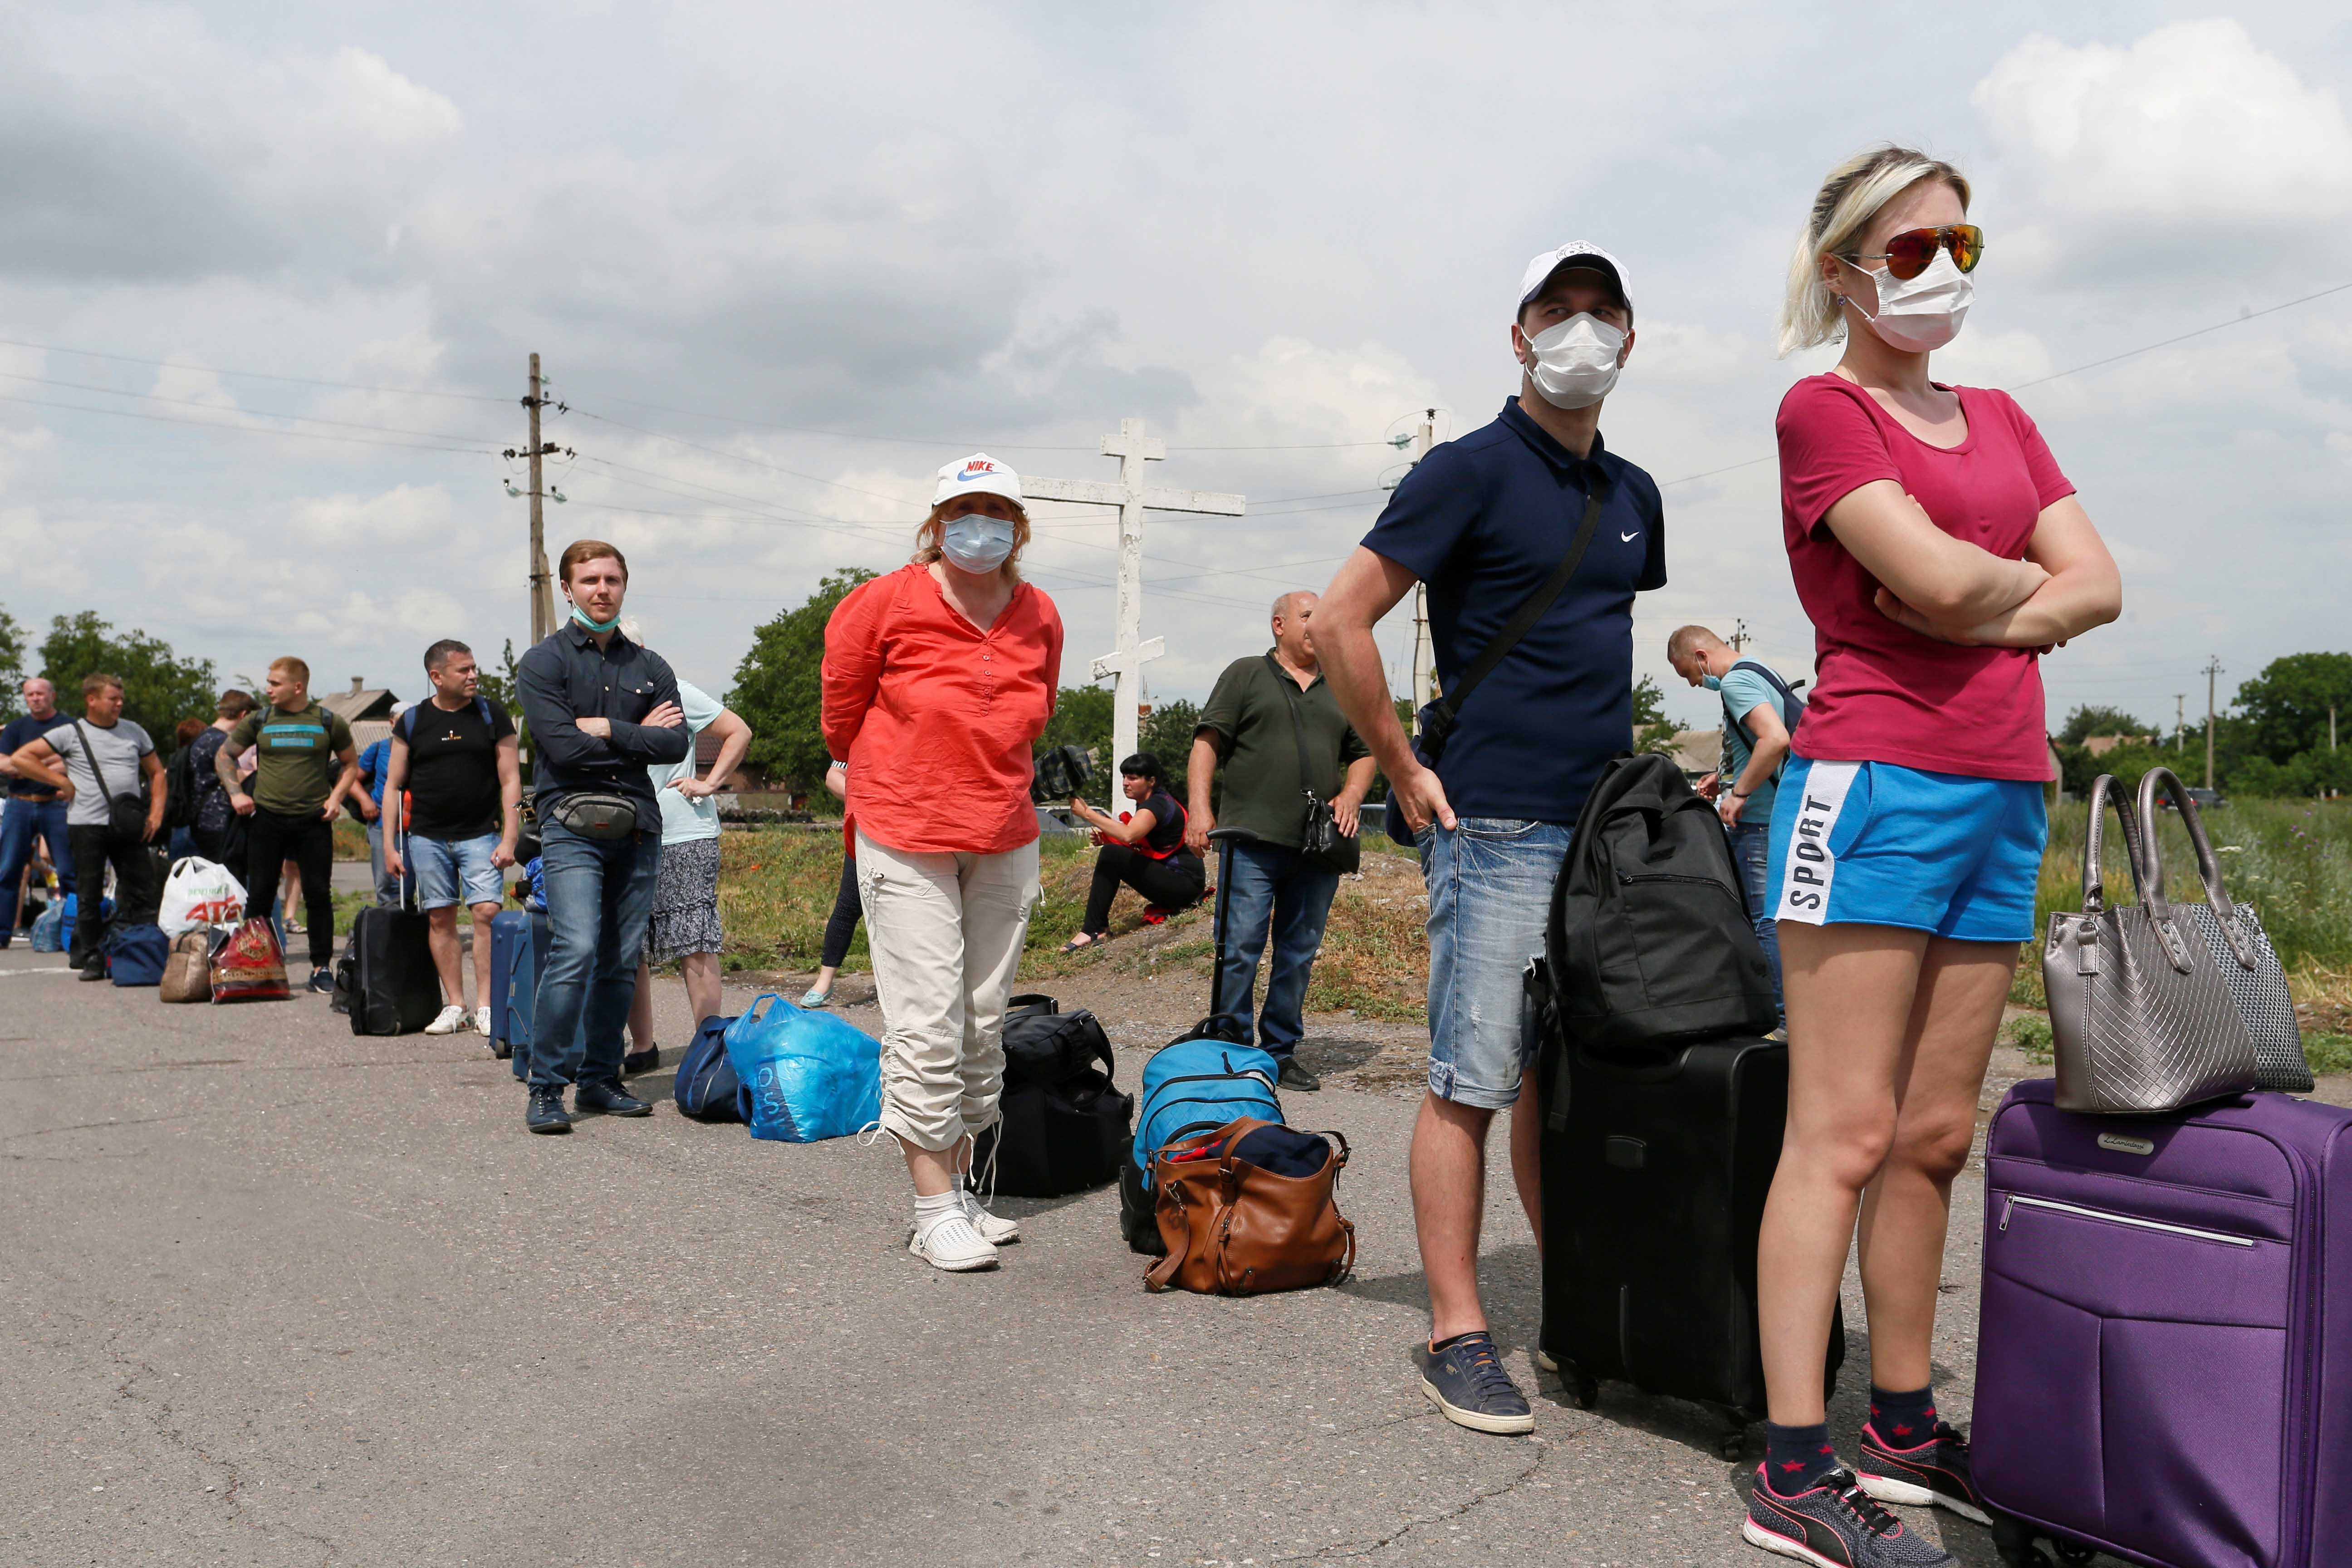 People queue before leaving the territory of the self-proclaimed Donetsk People's Republic and crossing a separation line with Ukraine at a checkpoint, which was temporary closed due to the Covid-19 outbreak and then reopened, in Donetsk Region, Ukraine. June 22, 2020.